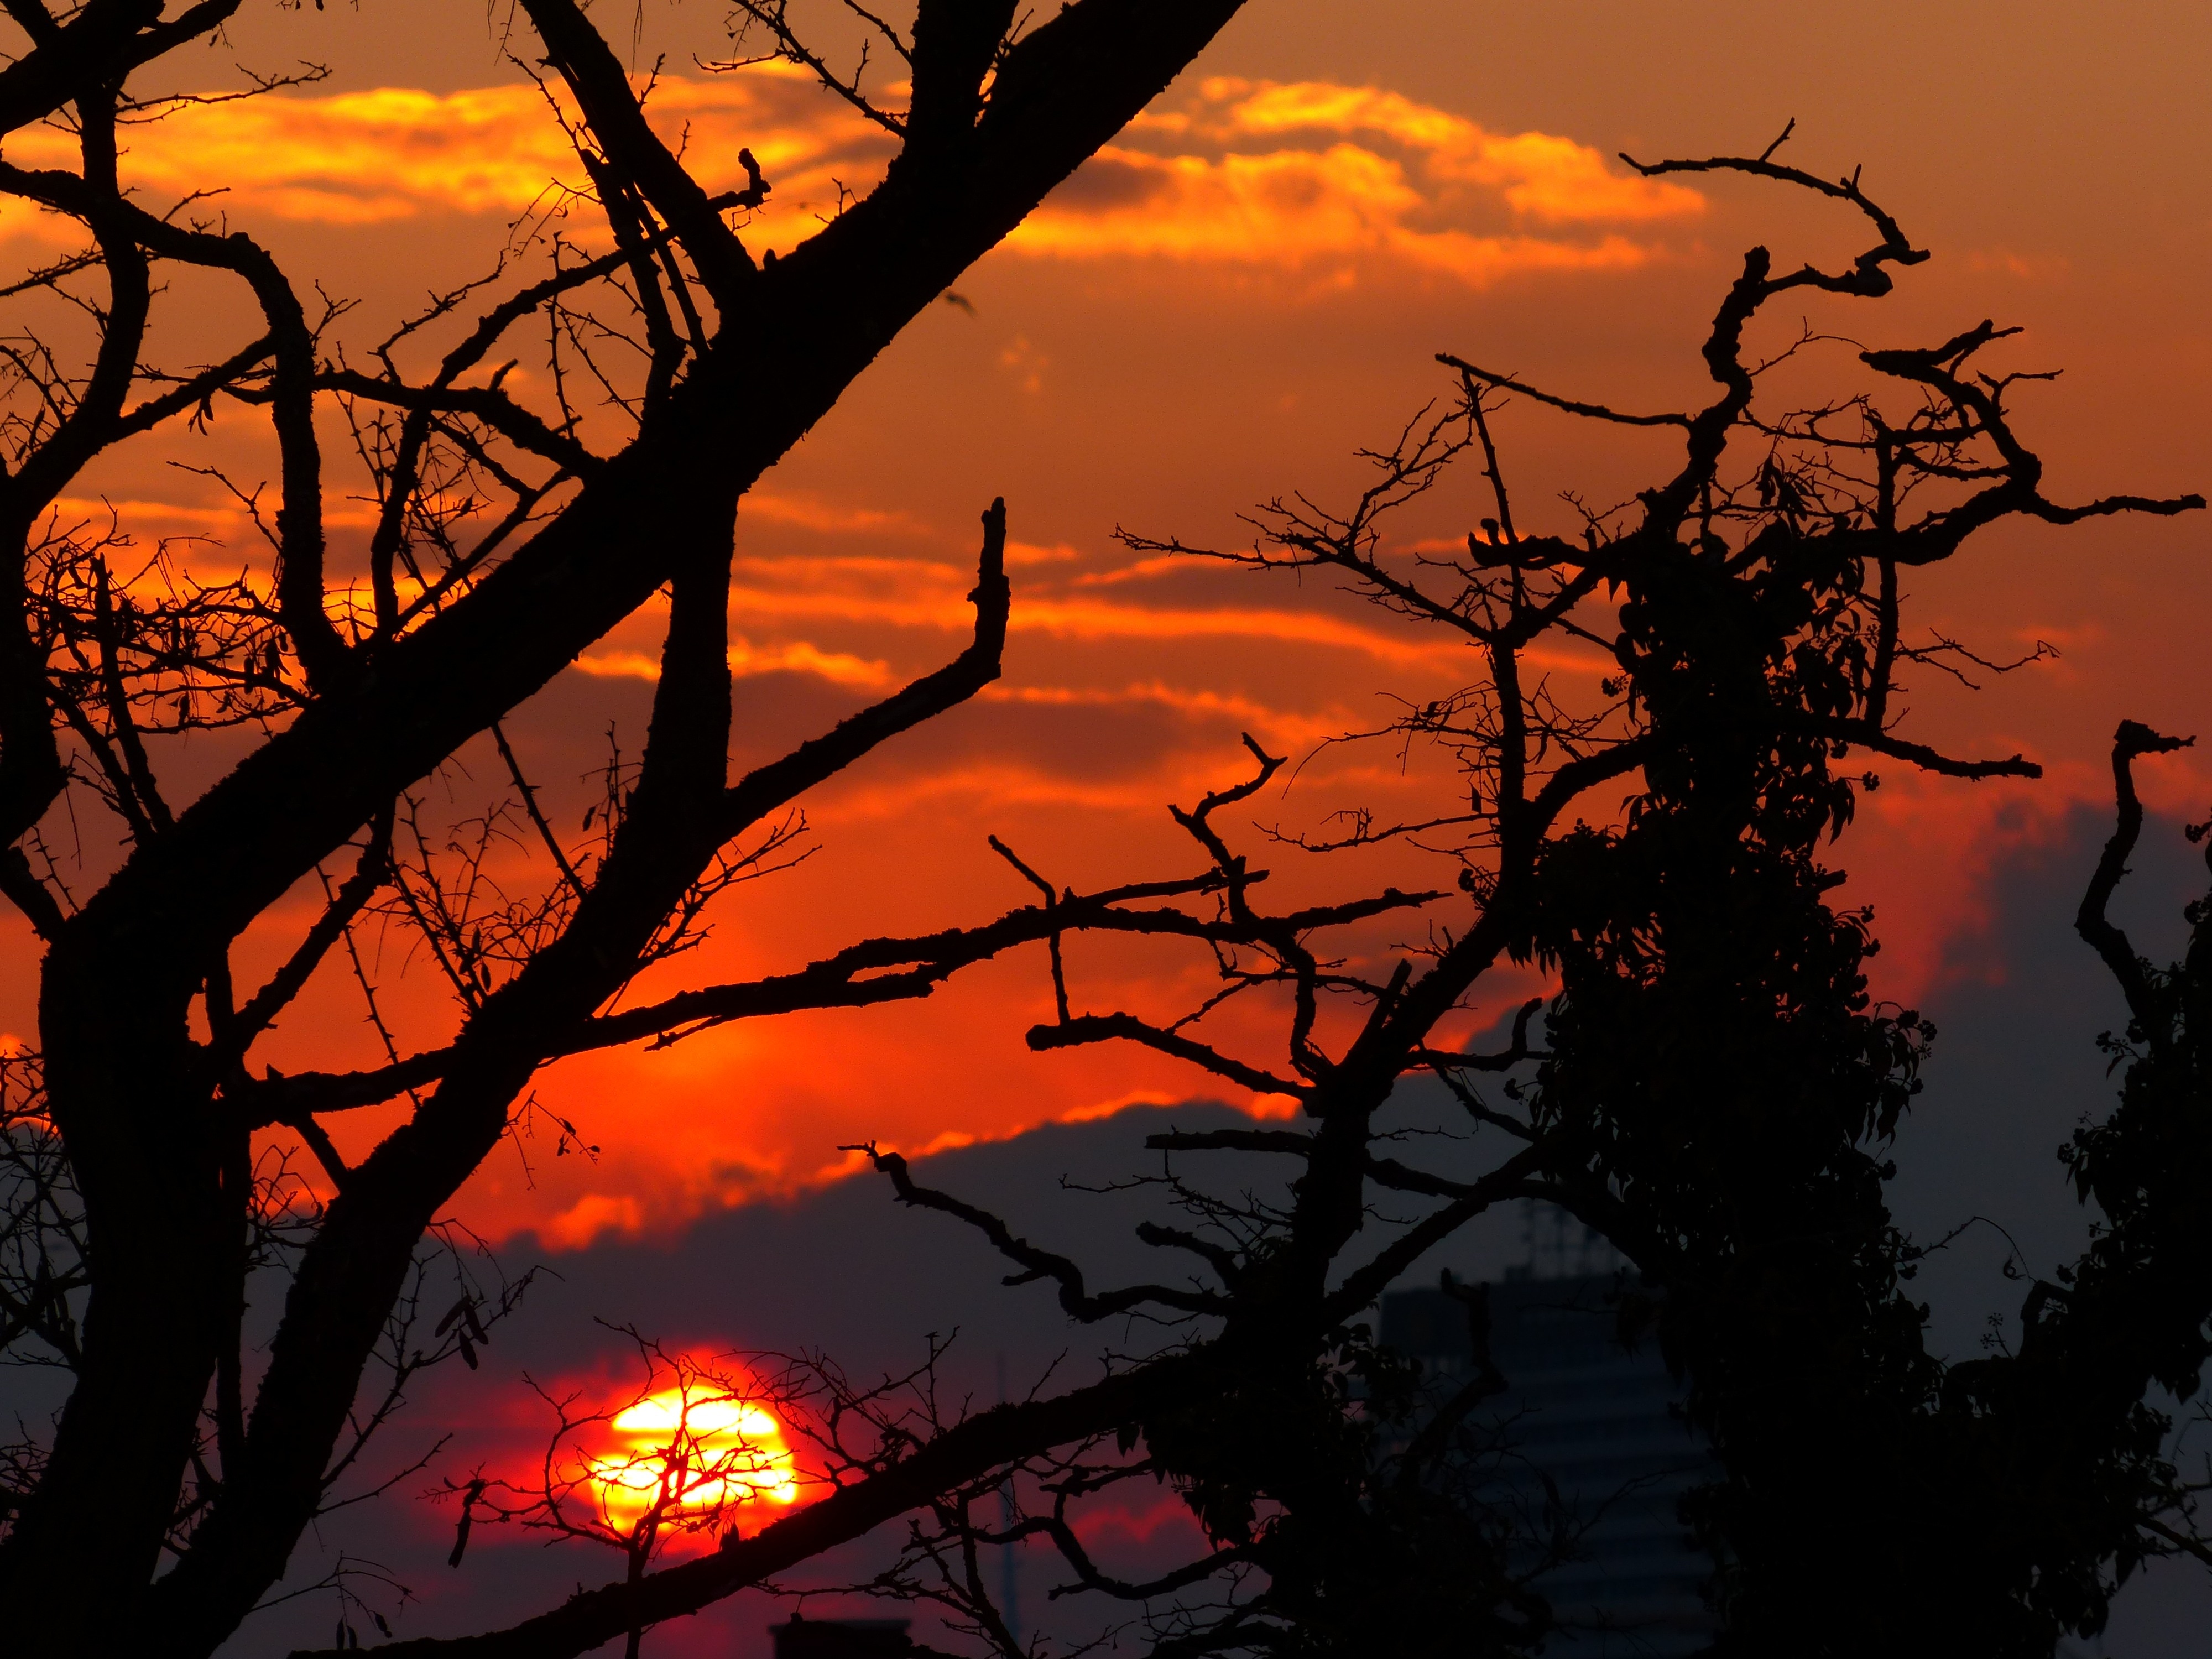 sunset and silhouette of bare trees